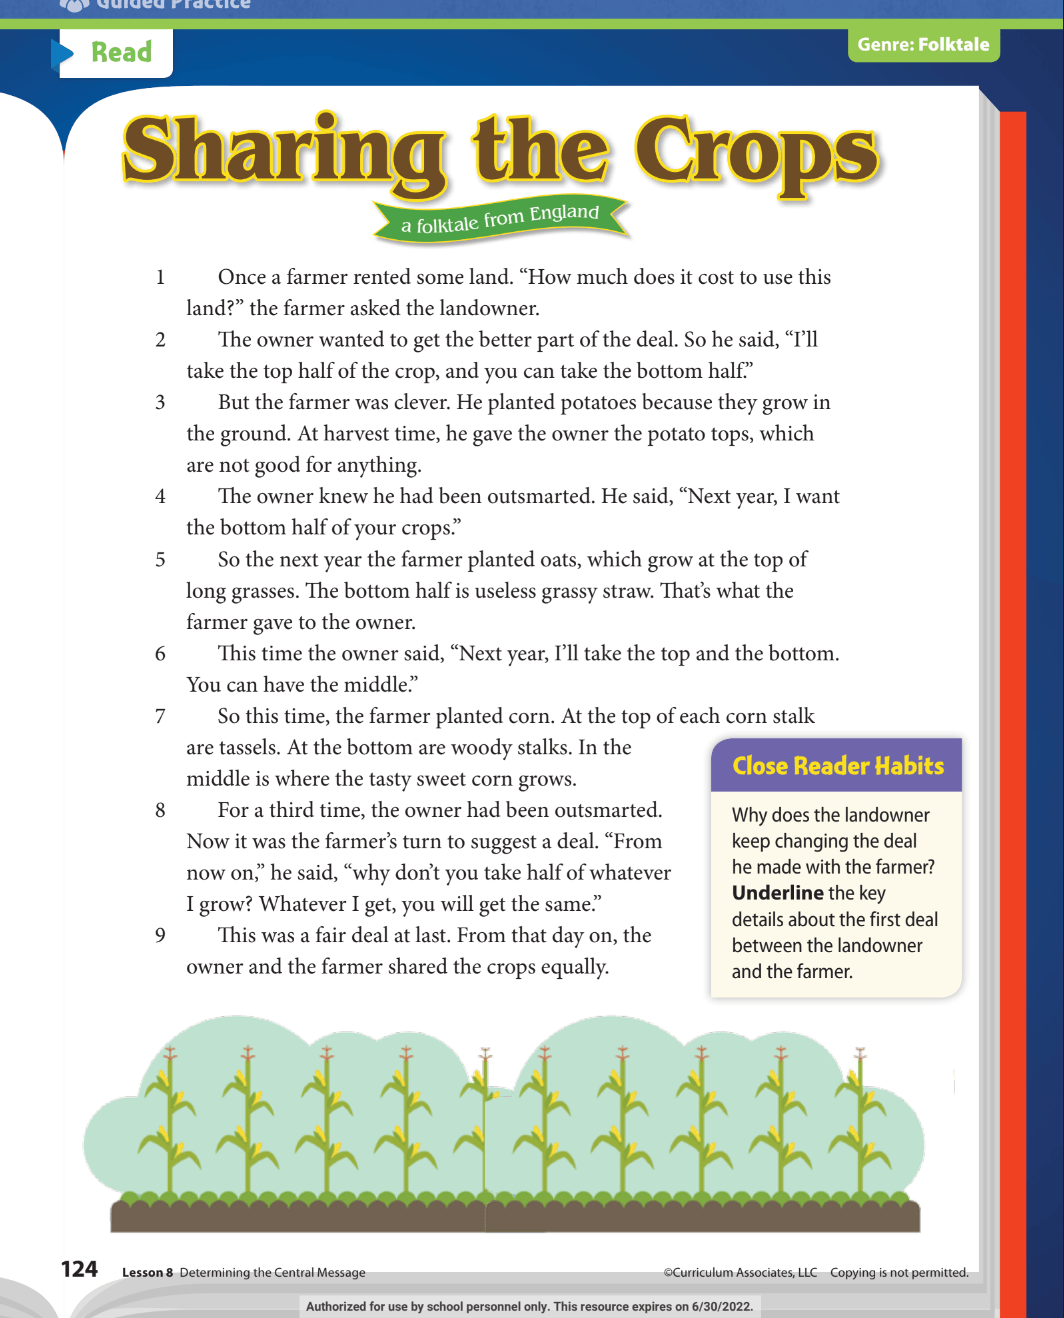 Sharing the Crops (ACAP BLITZ) questions & answers for quizzes and ...